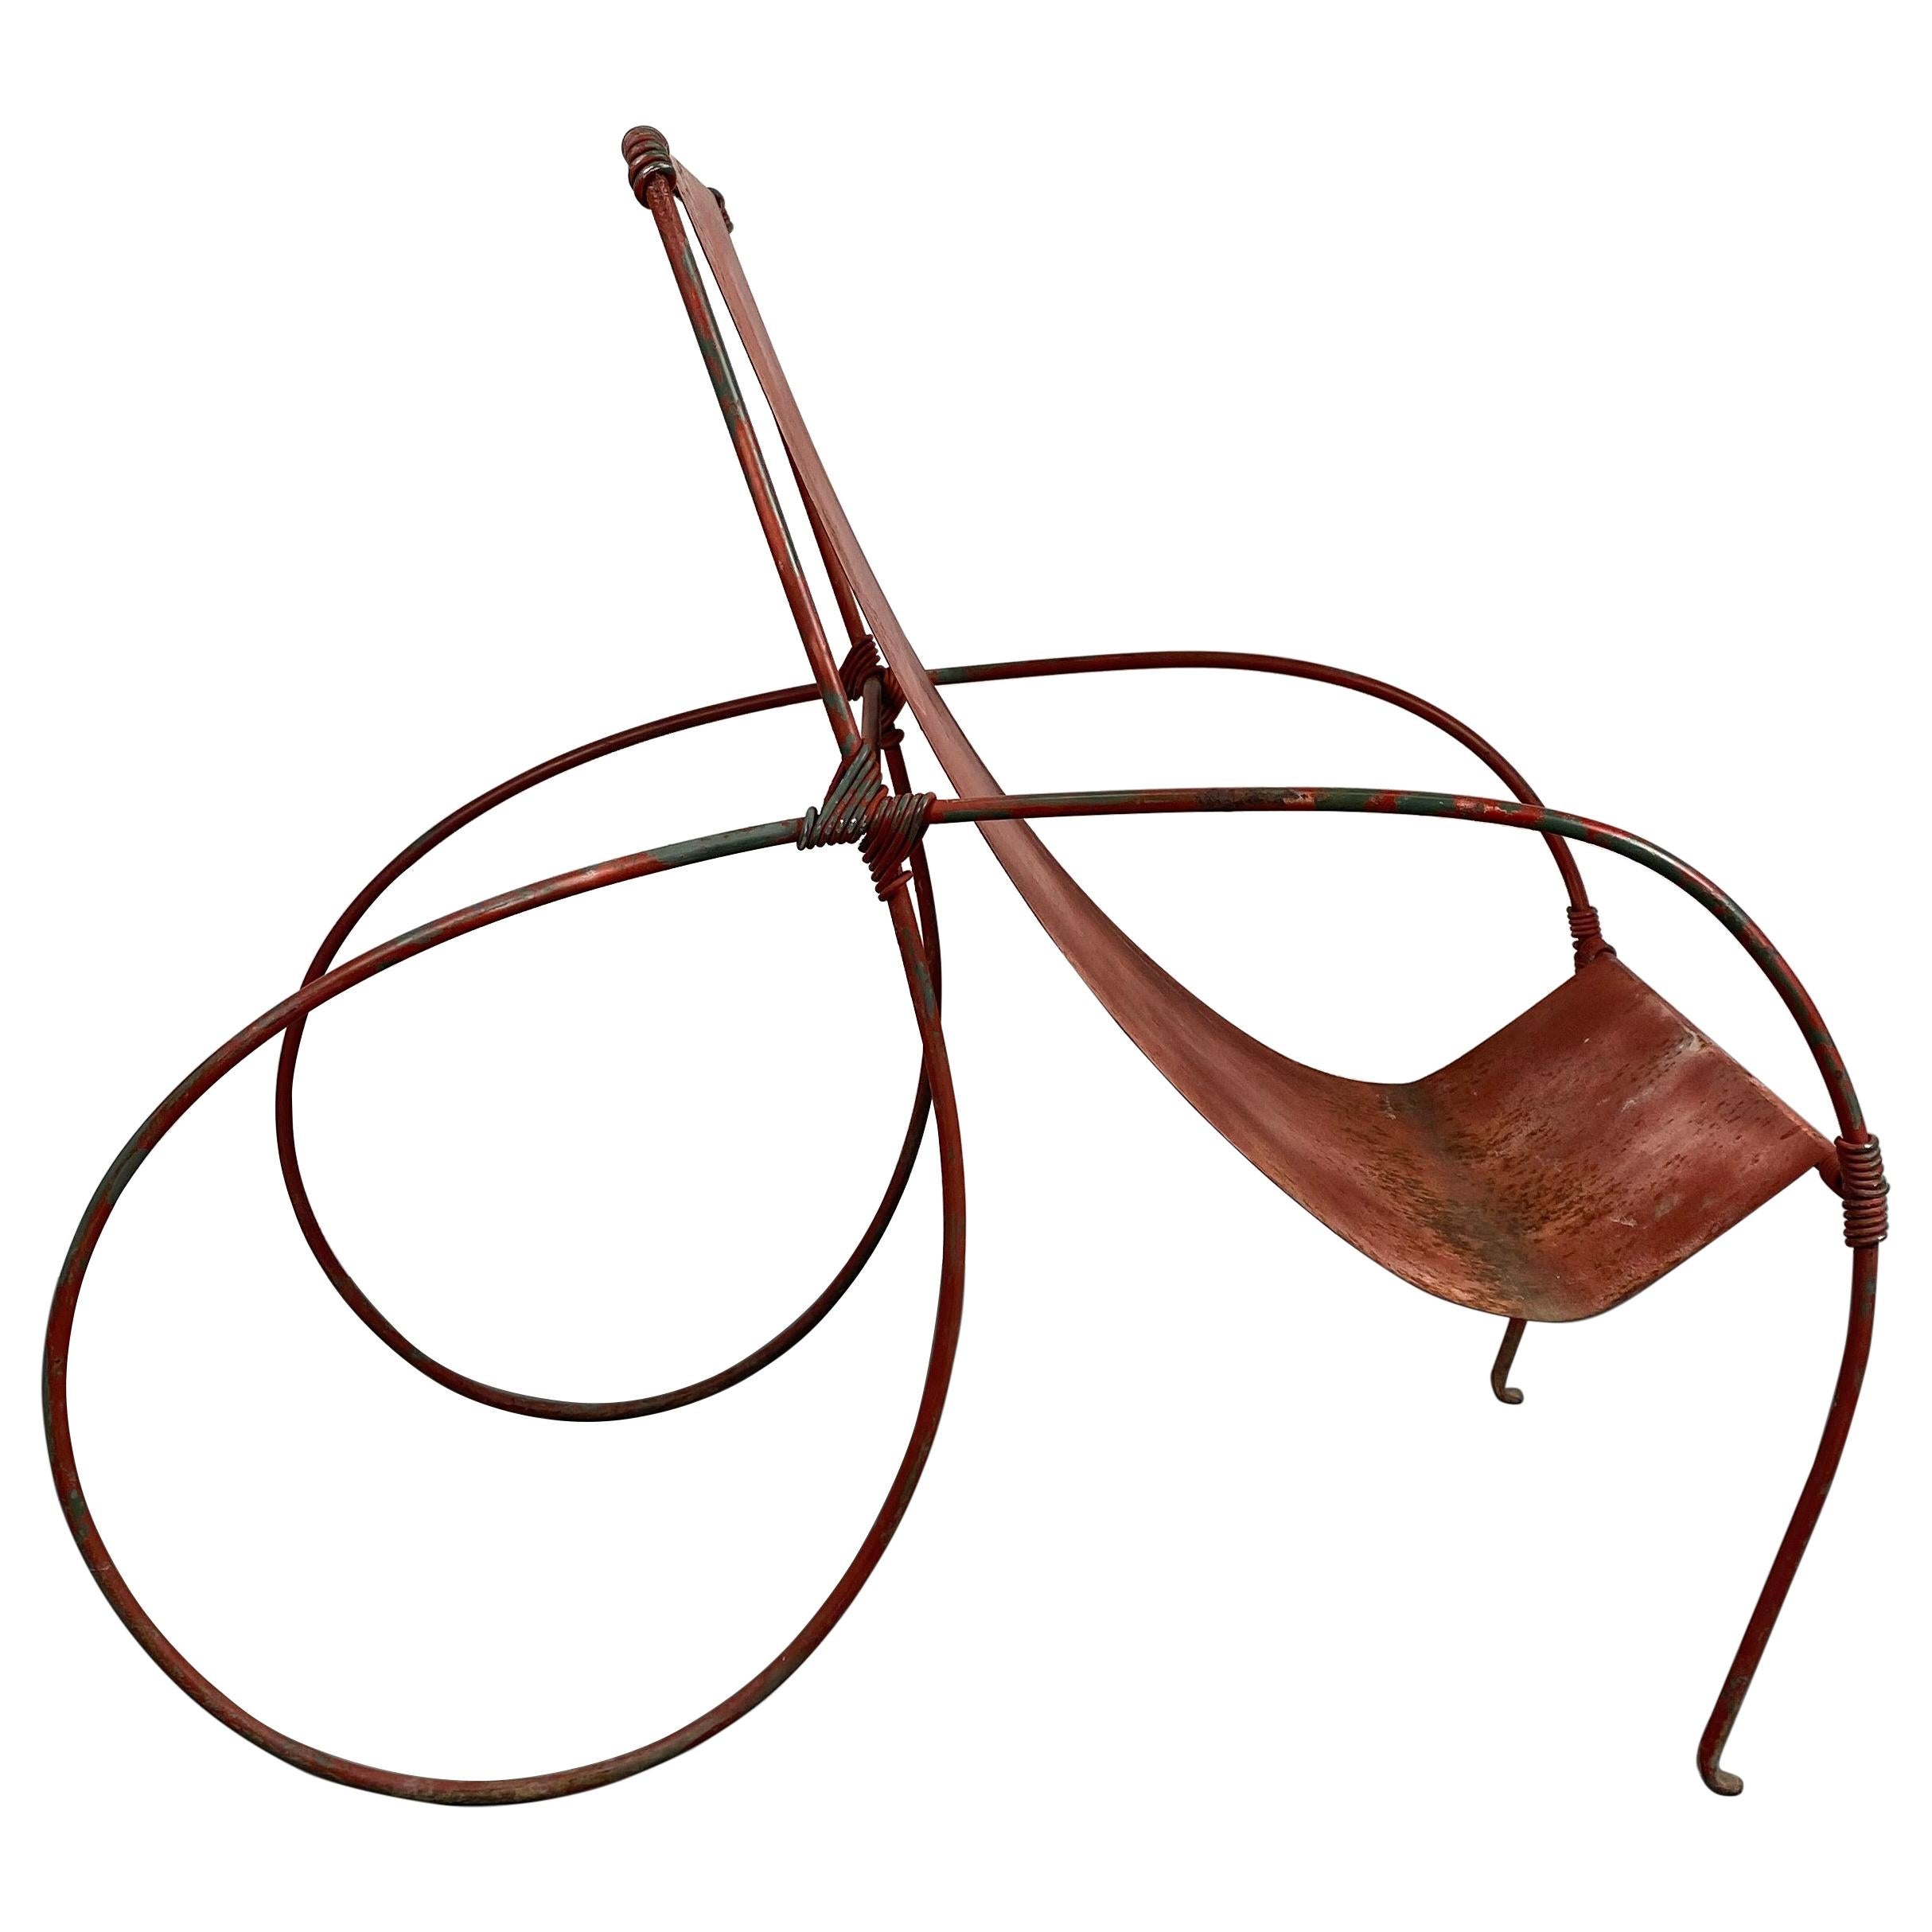 Unusual Sculptural Iron Garden Lounge Chair Manner of Jean-Charles Moreux